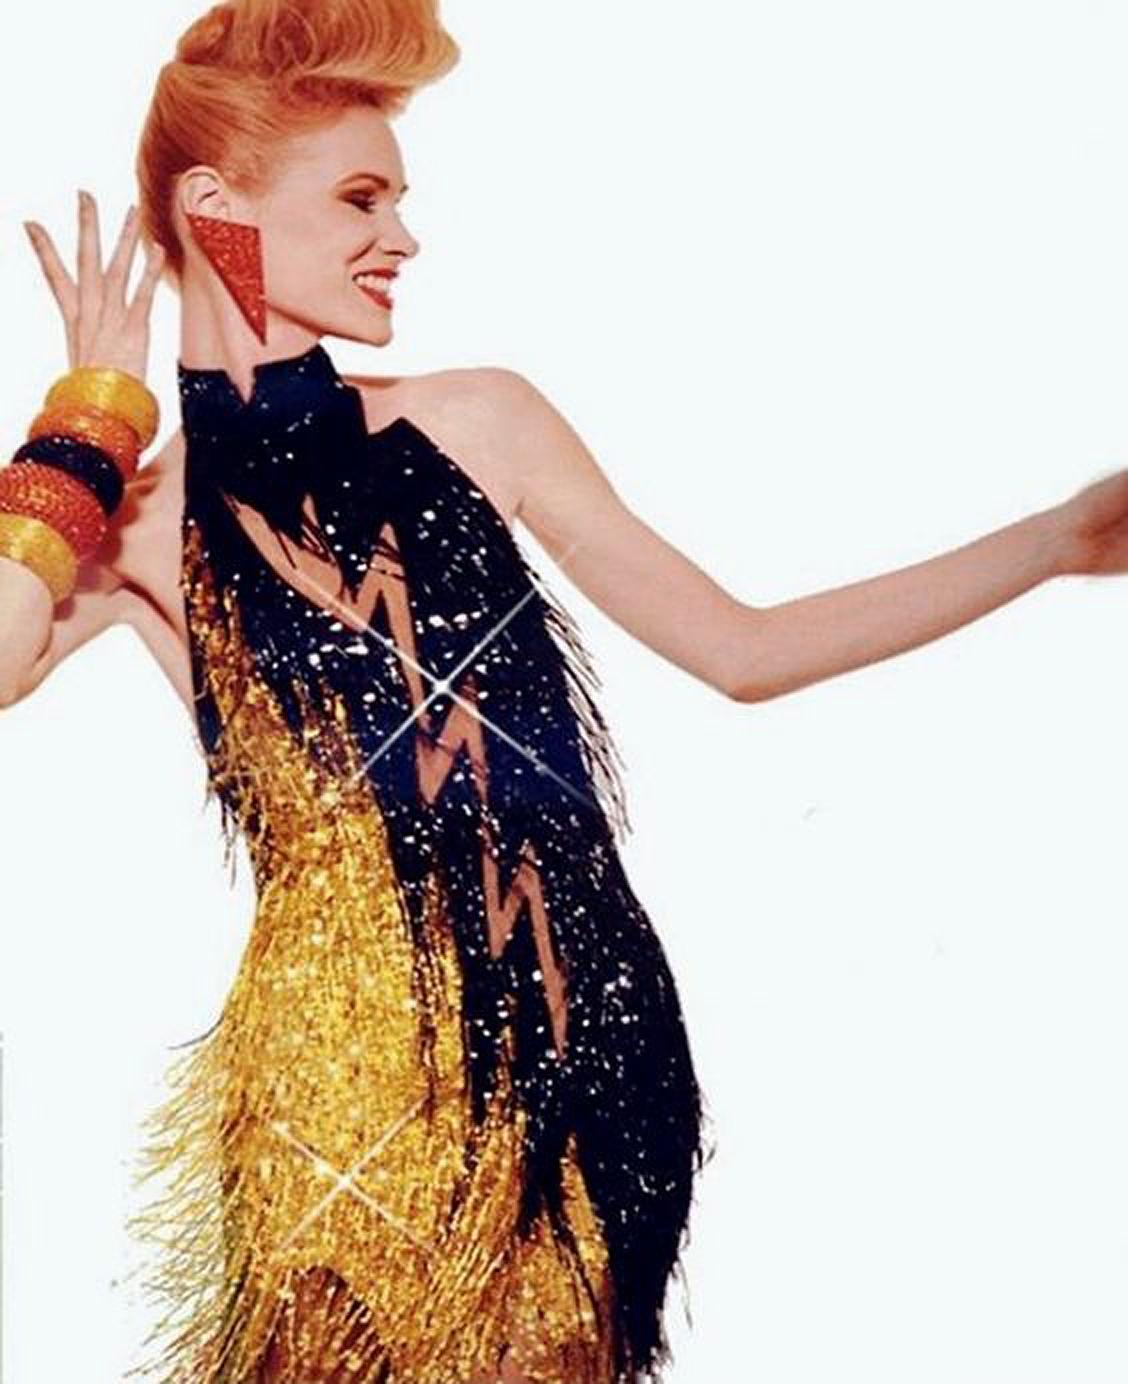 Fierce fully-beaded sequin Bob Mackie designer dress dating back to the early 1980's. Mackie began his career as a Hollywood costuming sketch artist, working for both Edith Head and Jean Louis. While working with designer Ray Aghayan, Mackie soon